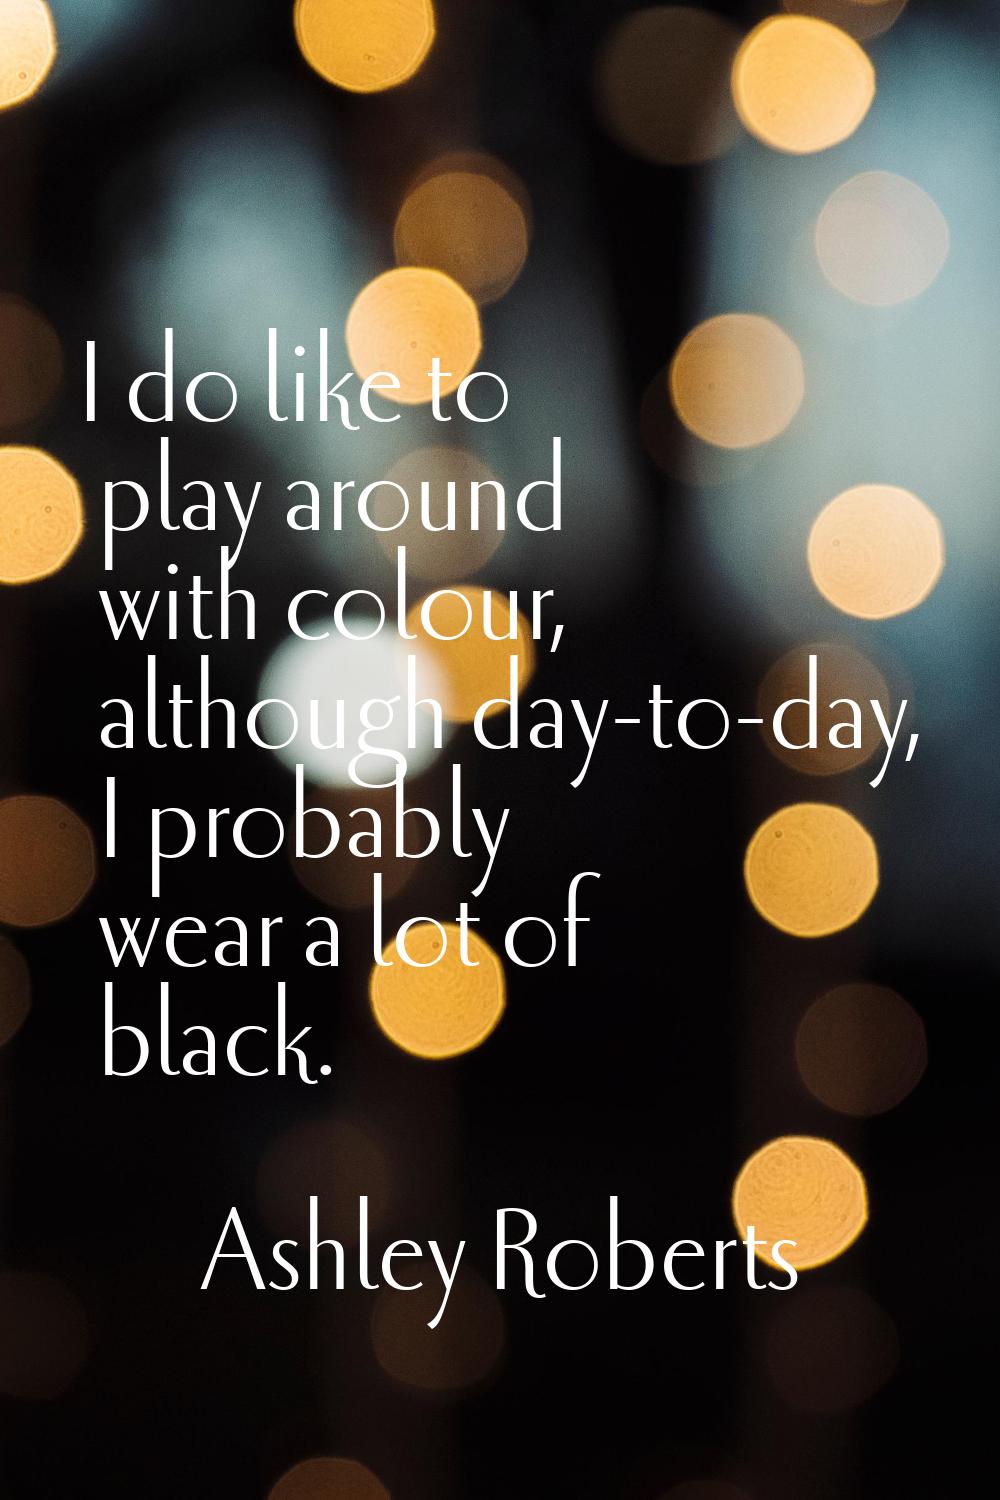 I do like to play around with colour, although day-to-day, I probably wear a lot of black.